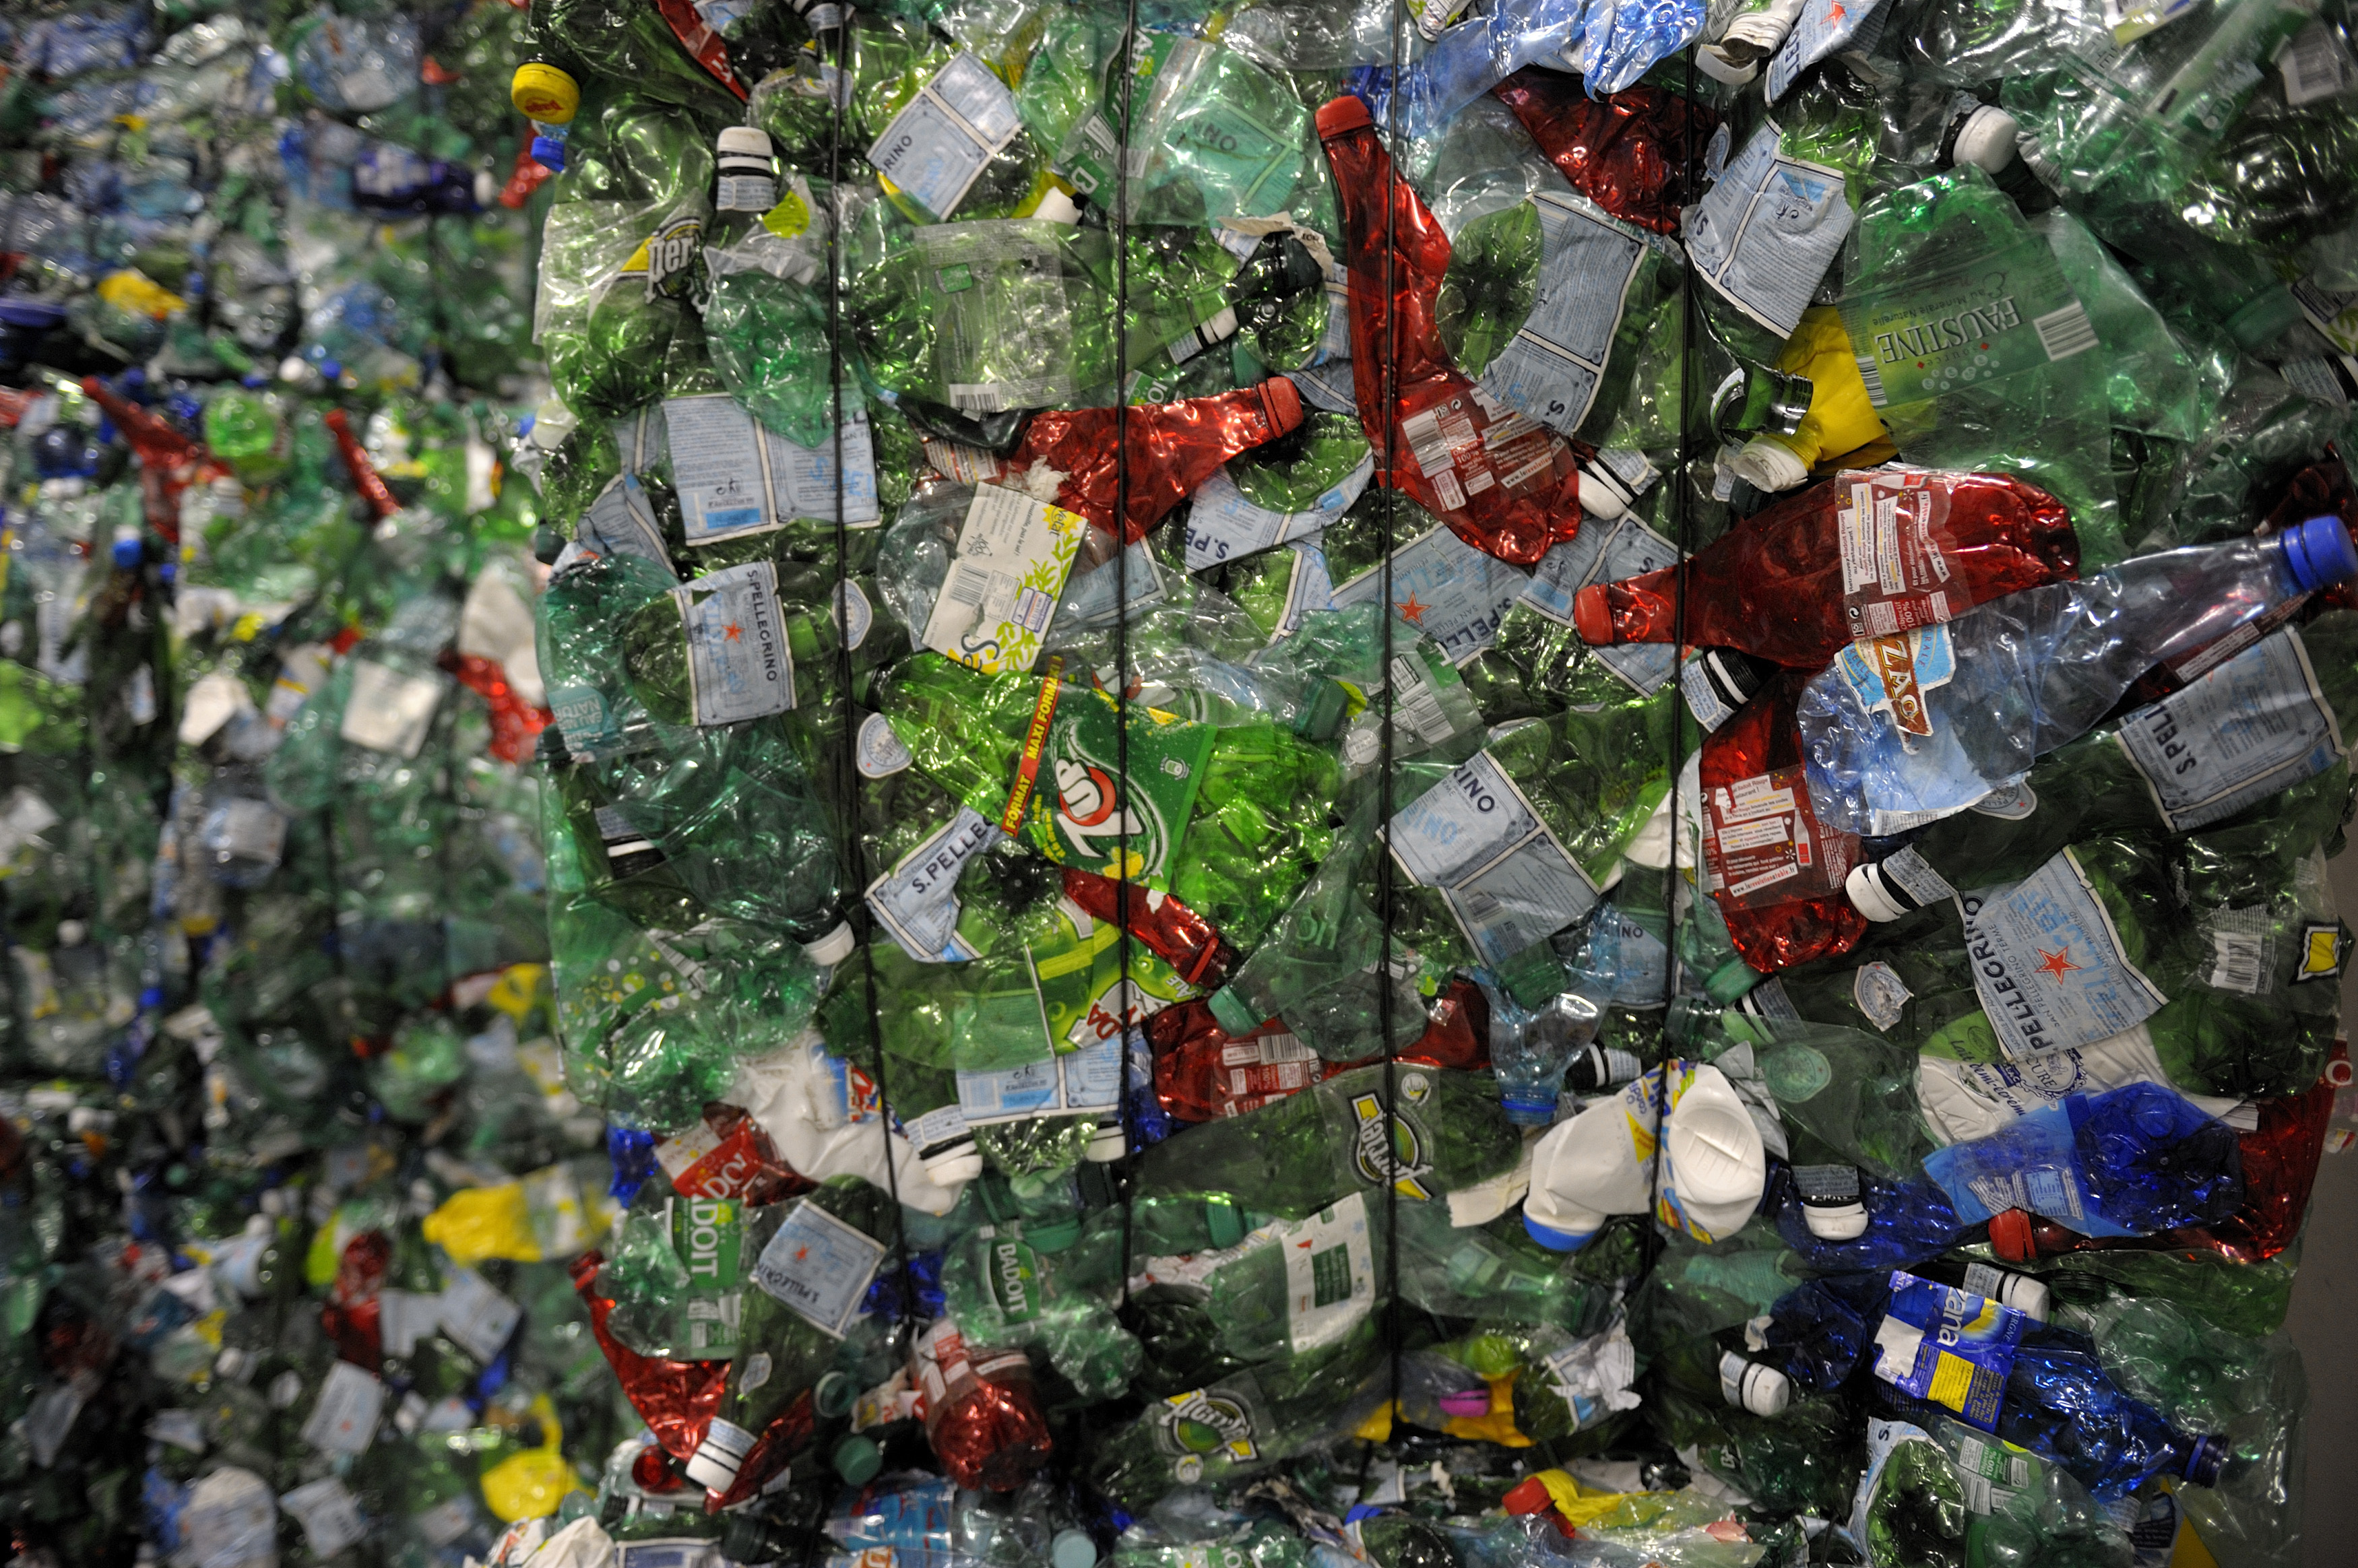 Crushed plastic bottles are seen at a recycling centre in Paris